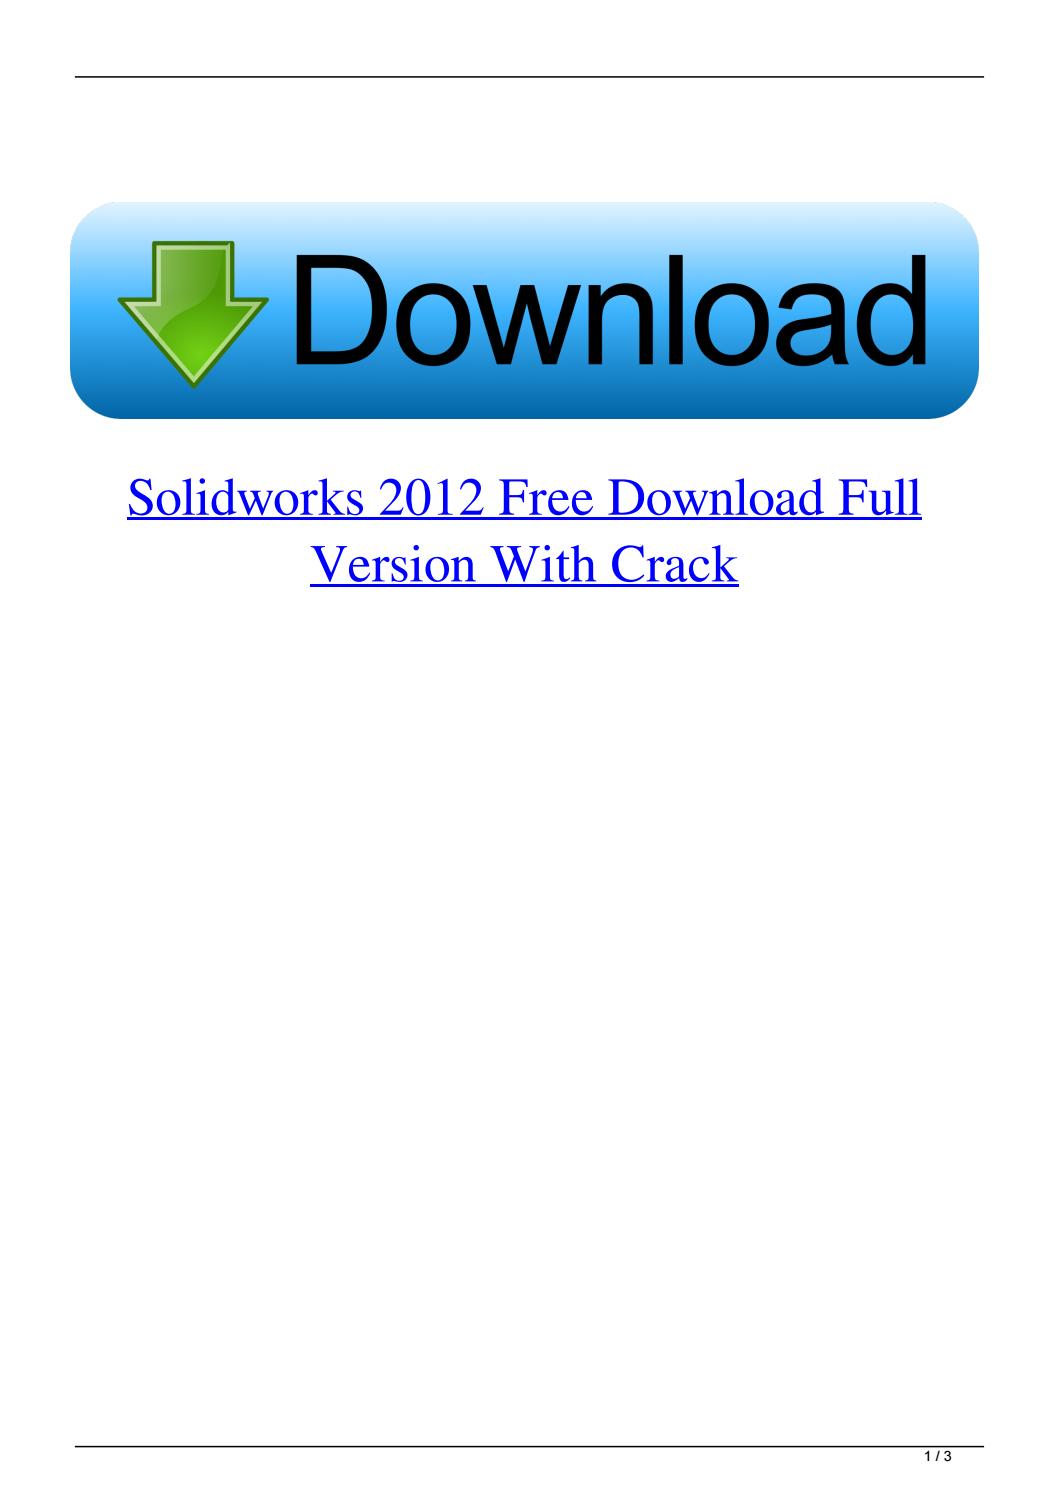 Cracked solidworks free download site